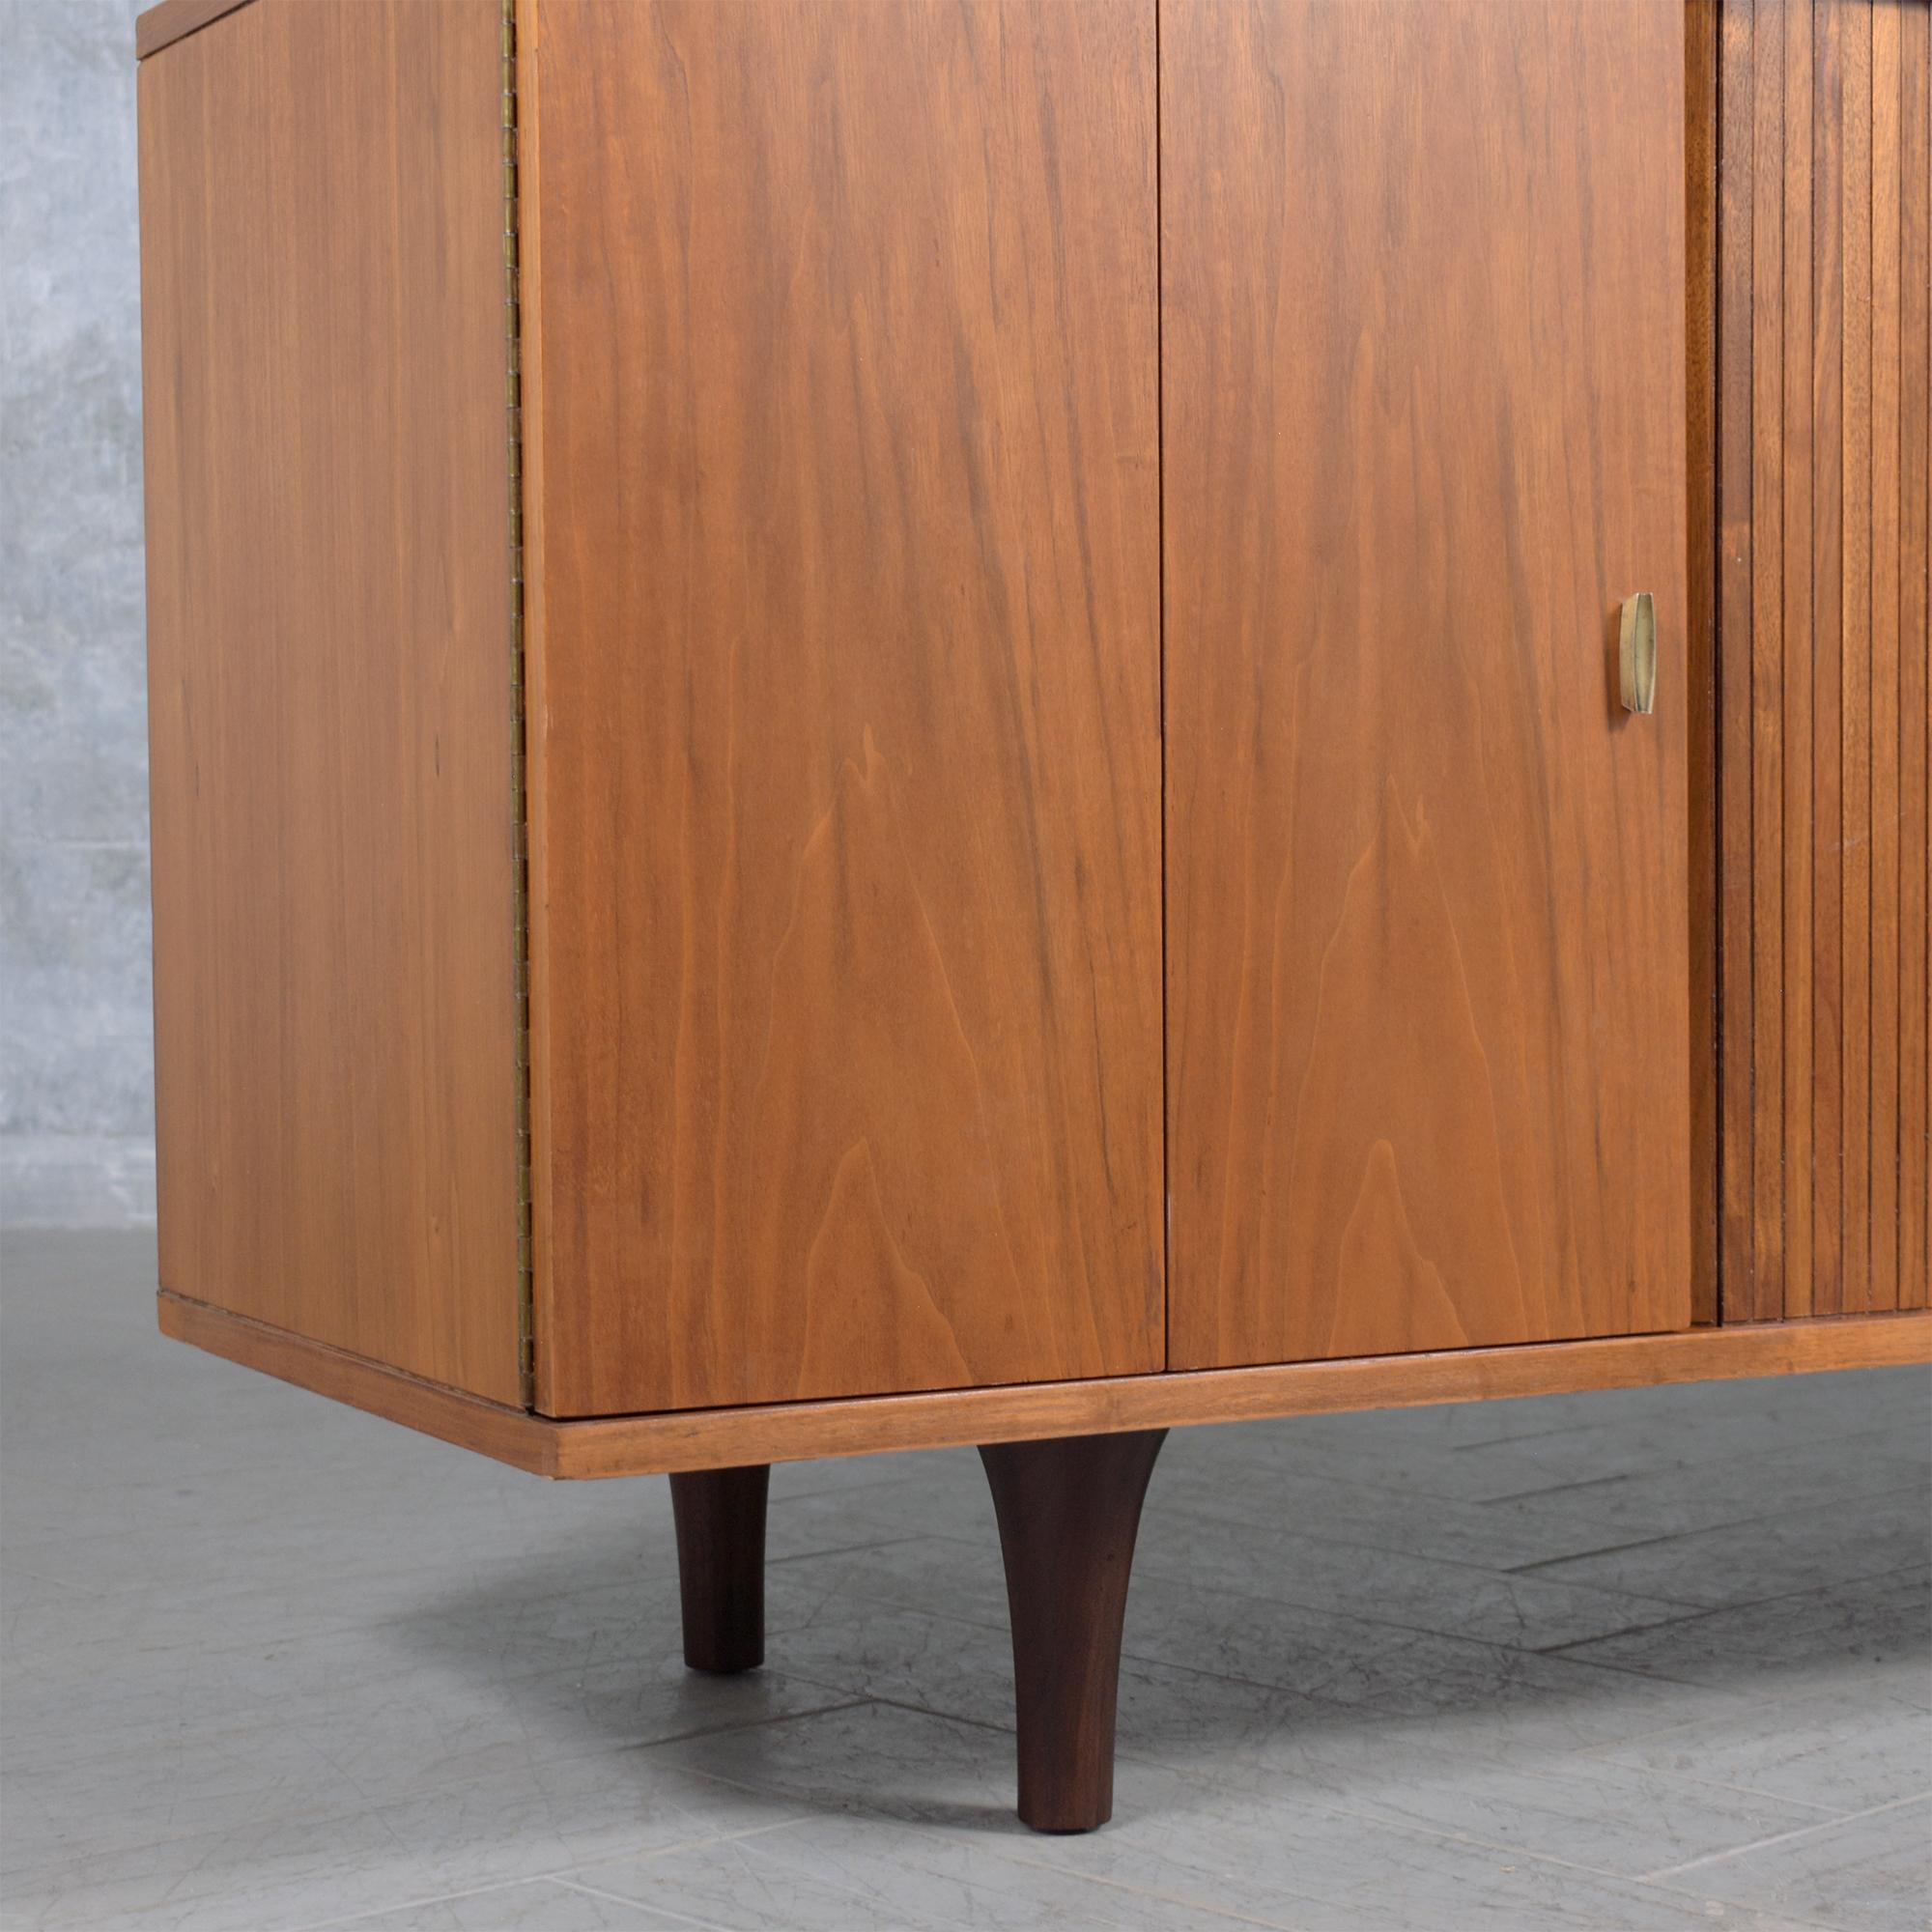 1960s Mid-Century Modern Walnut Credenza with Tambour Doors and Storage For Sale 8